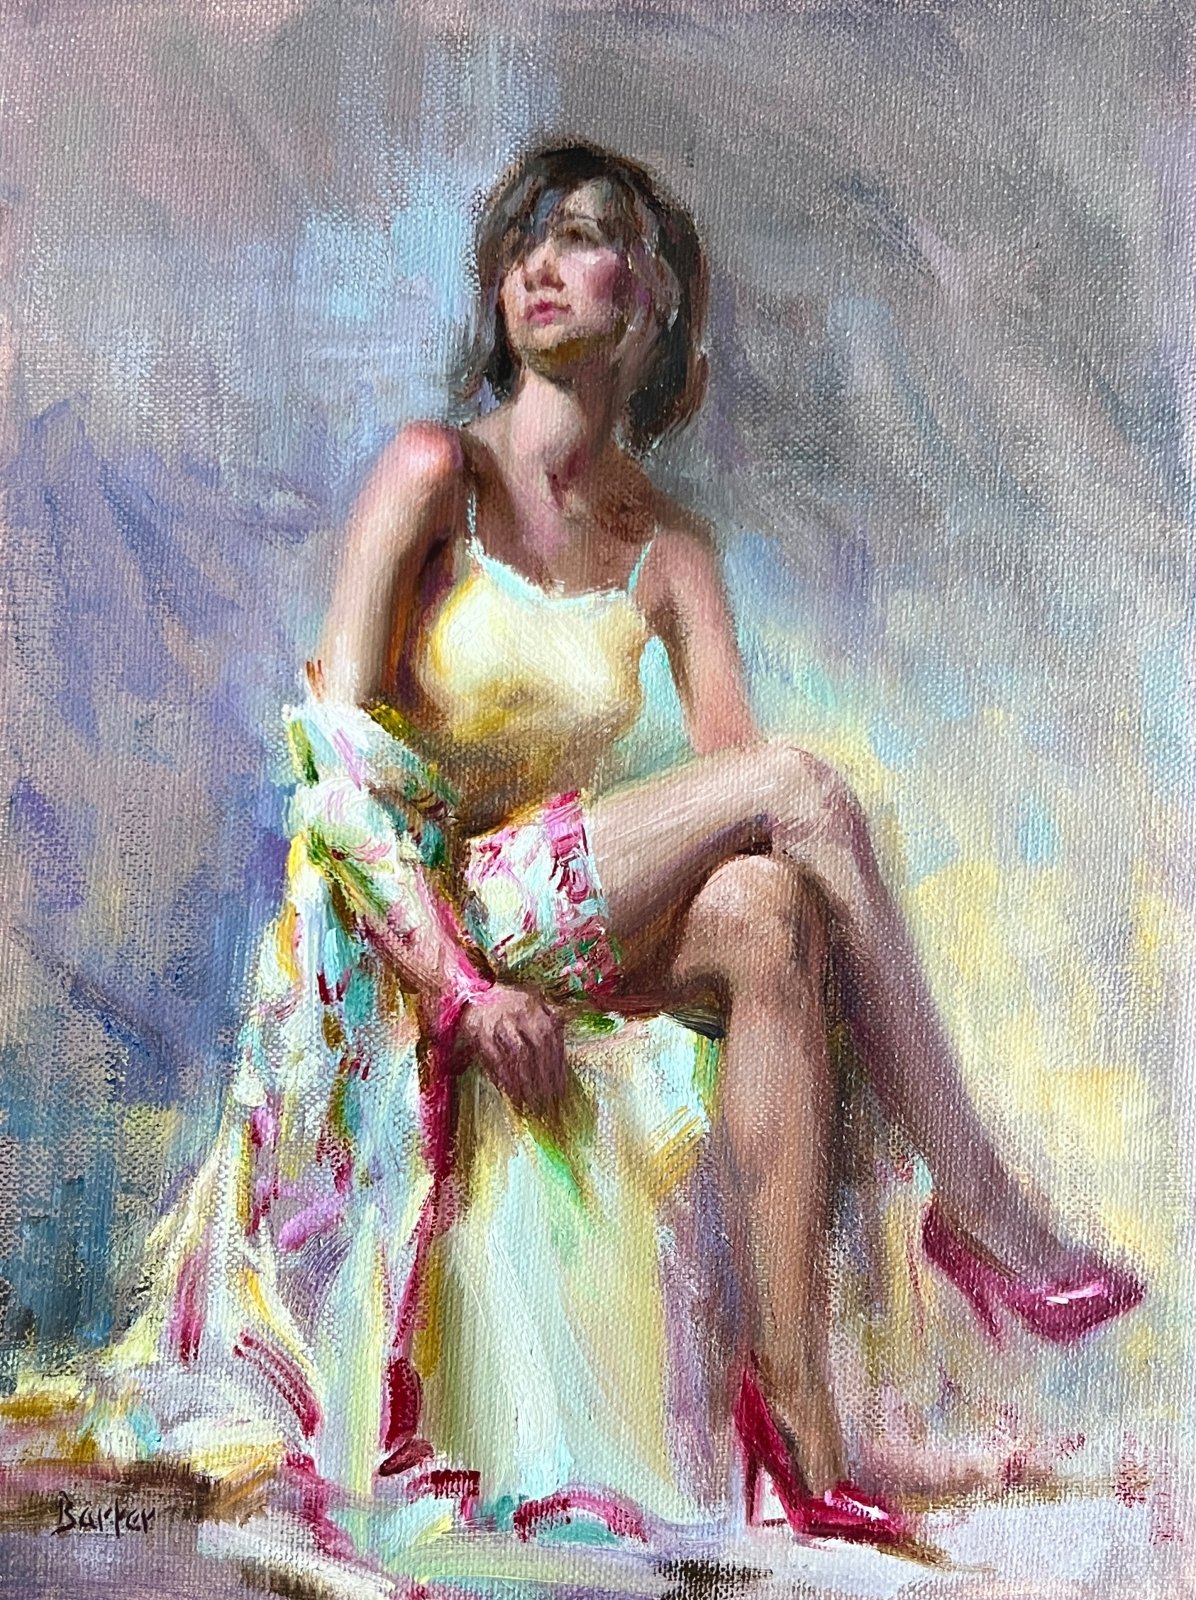 Silk and Hot Pink Heels by Stacy Barter at LePrince Galleries